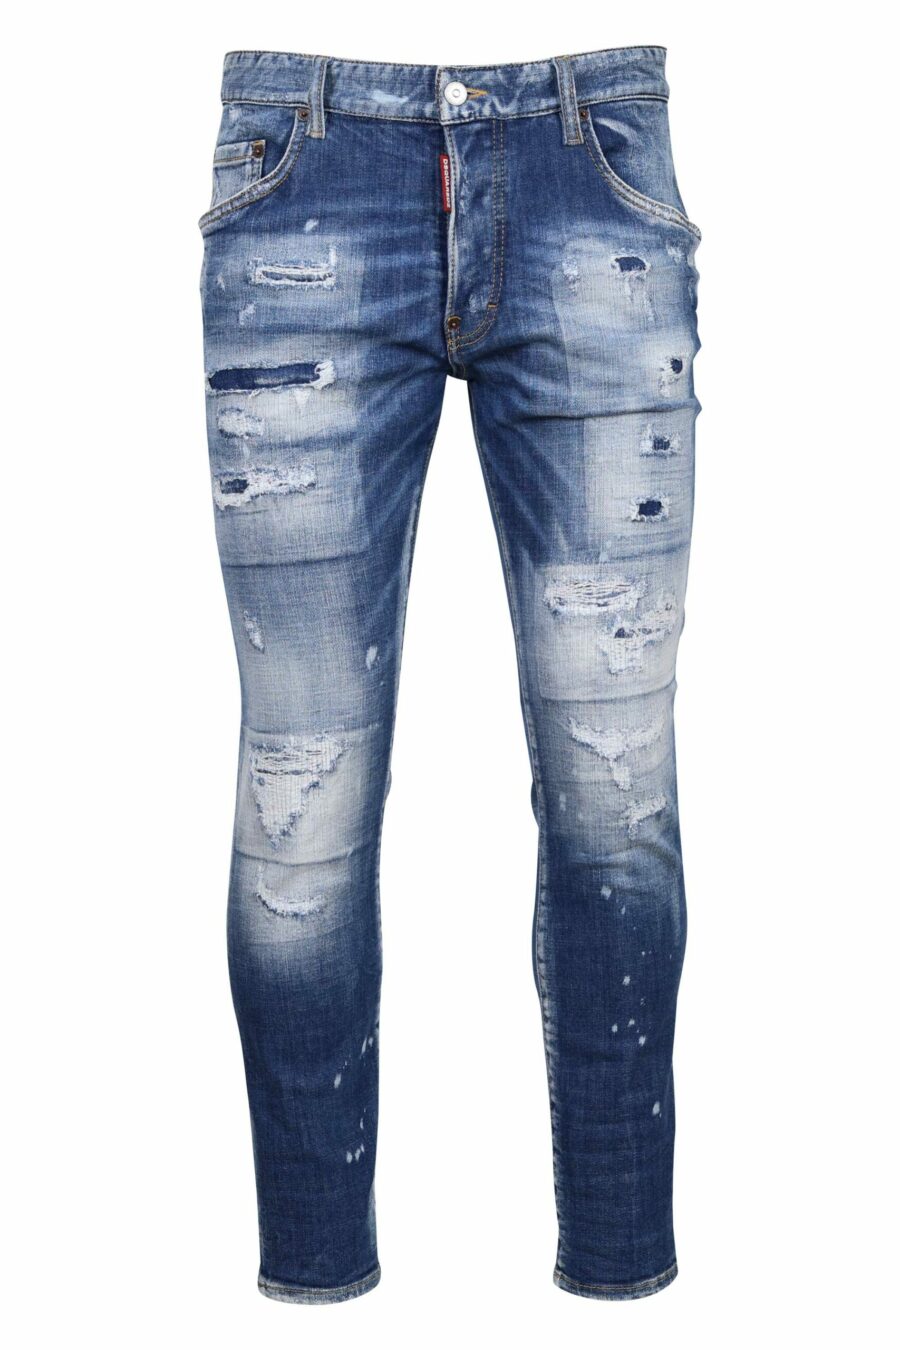 Light blue jeans "skater jean" with rips and frayed - 8054148338848 scaled